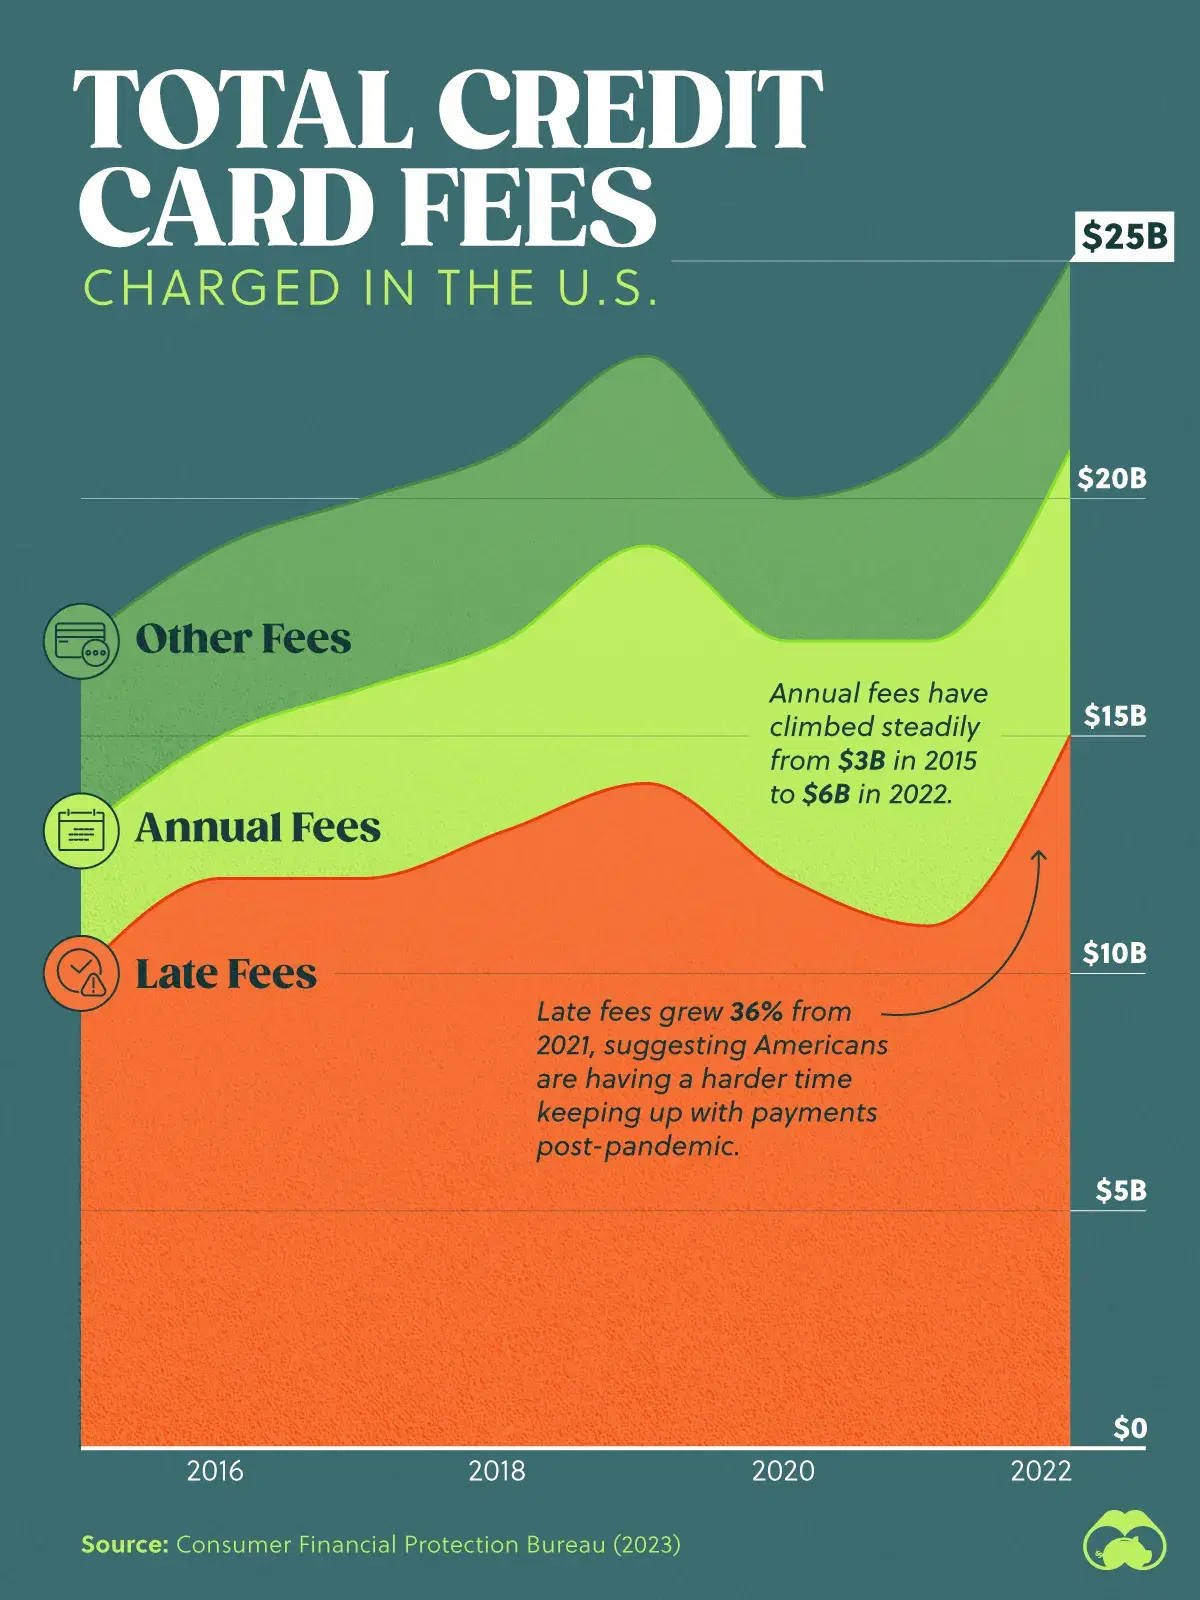 Americans Paid Record Credit Card Fees of $25B in 2022 💳